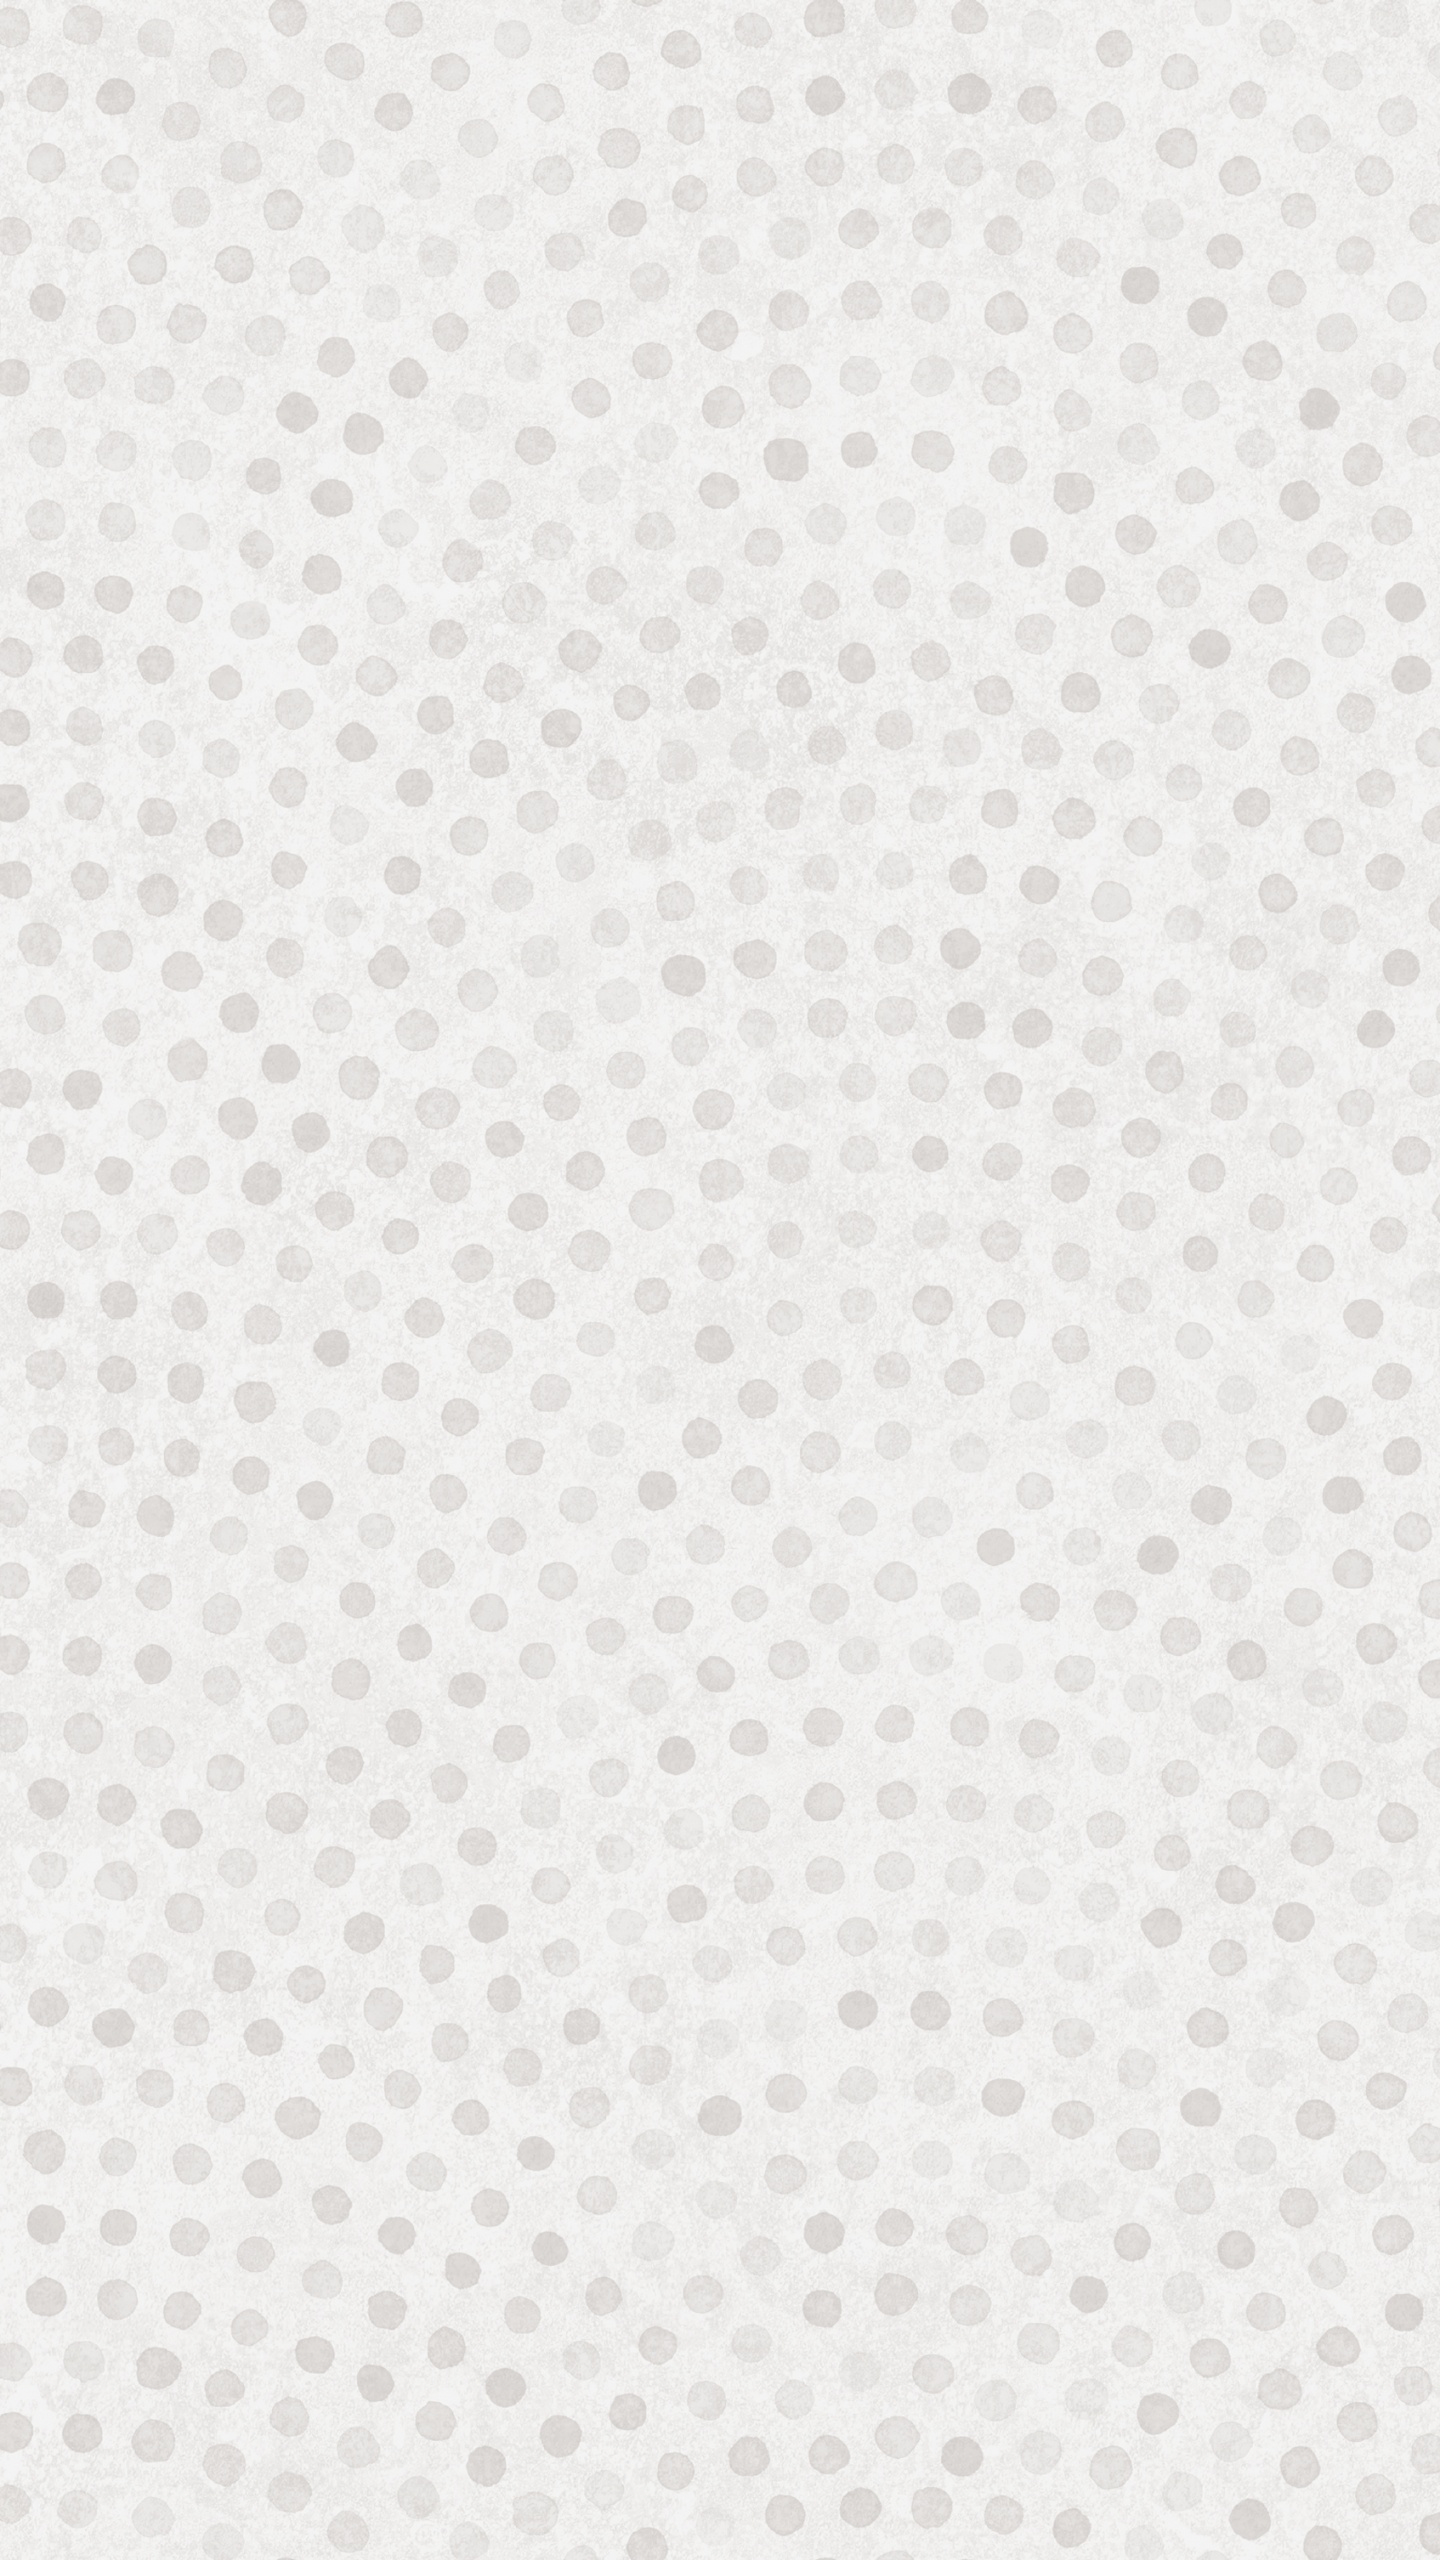 White and Black Polka Dot Textile. Wallpaper in 1440x2560 Resolution